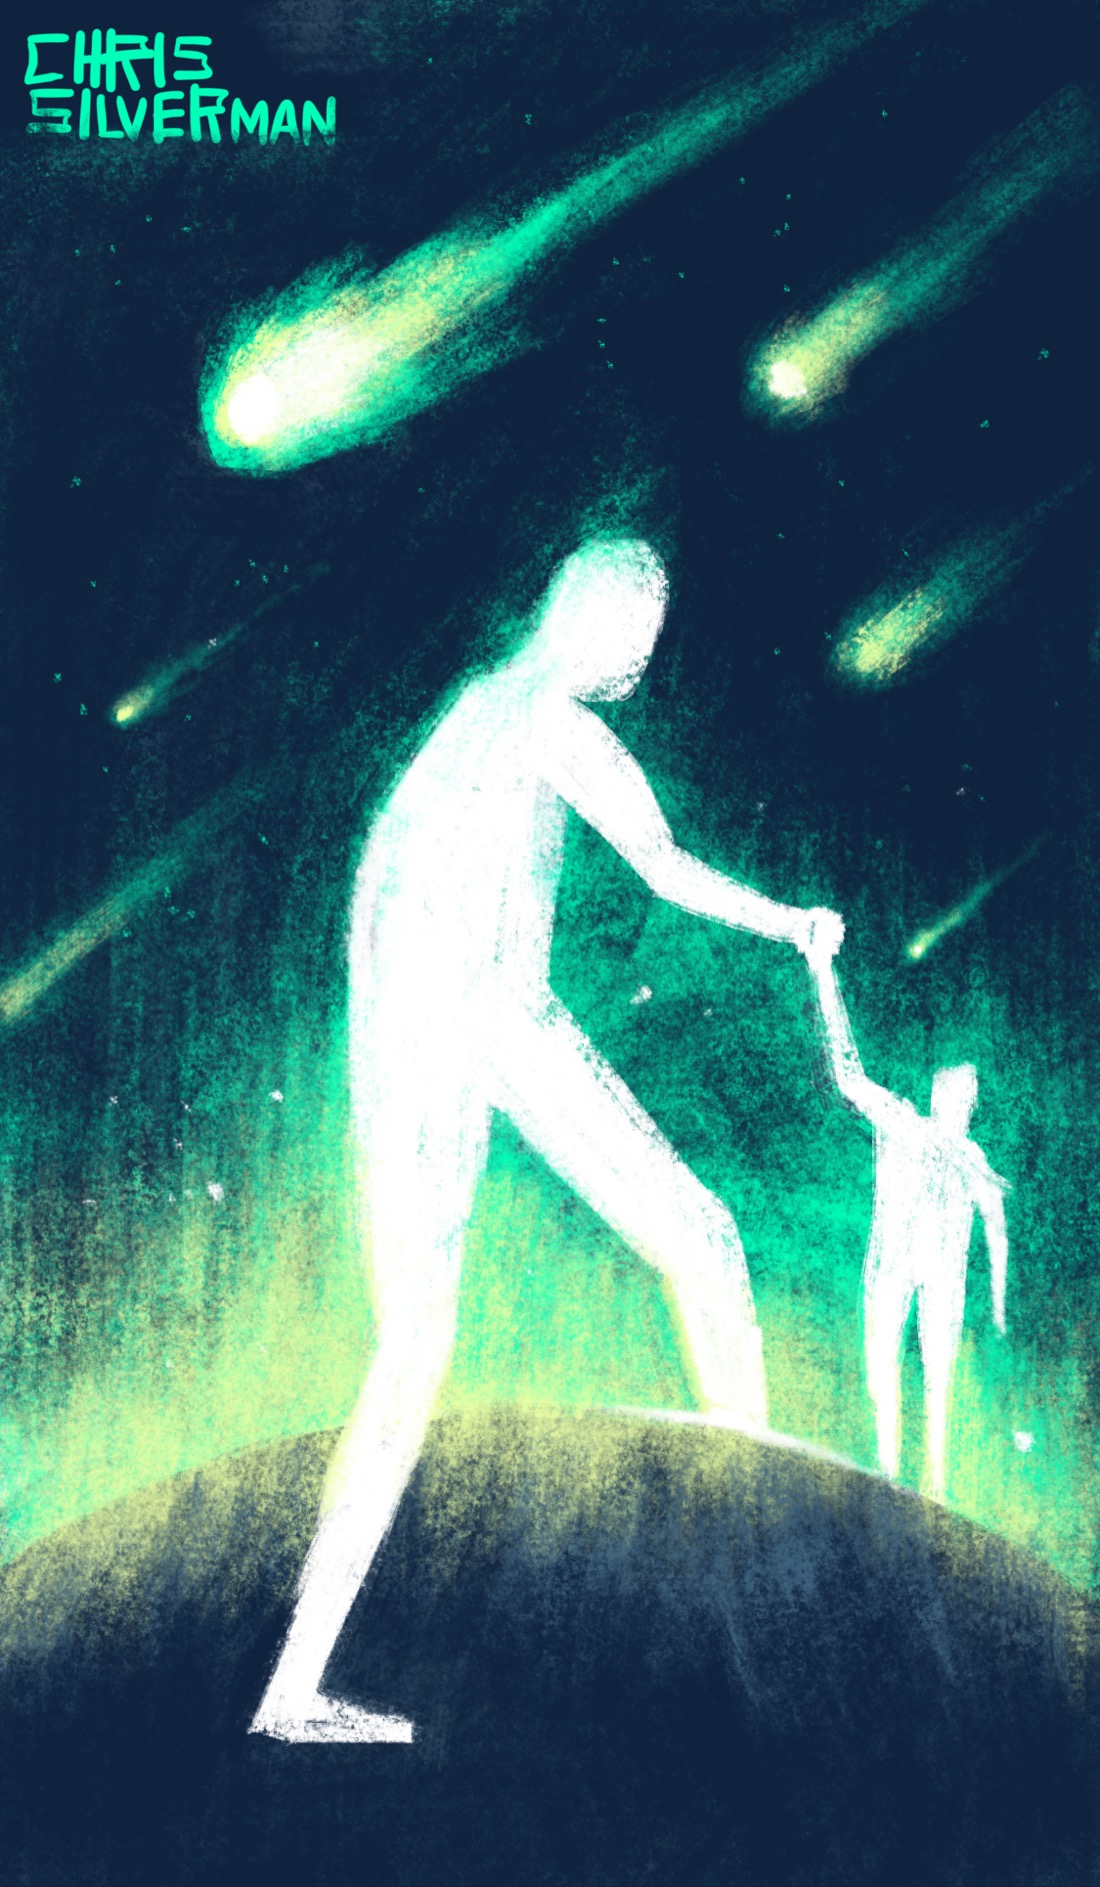 A tall, glowing white figure stands astride the curved horizon of a dark planet, reaching over to touch hands with another glowing white figure, this one slightly smaller, on the other side of the planet. There is an eerie green auroral glow on the horizon. Above, many green-tailed meteors hurtle through a starry sky. Anyone who remembers browsing the web in the late 1990s might be reminded of something.